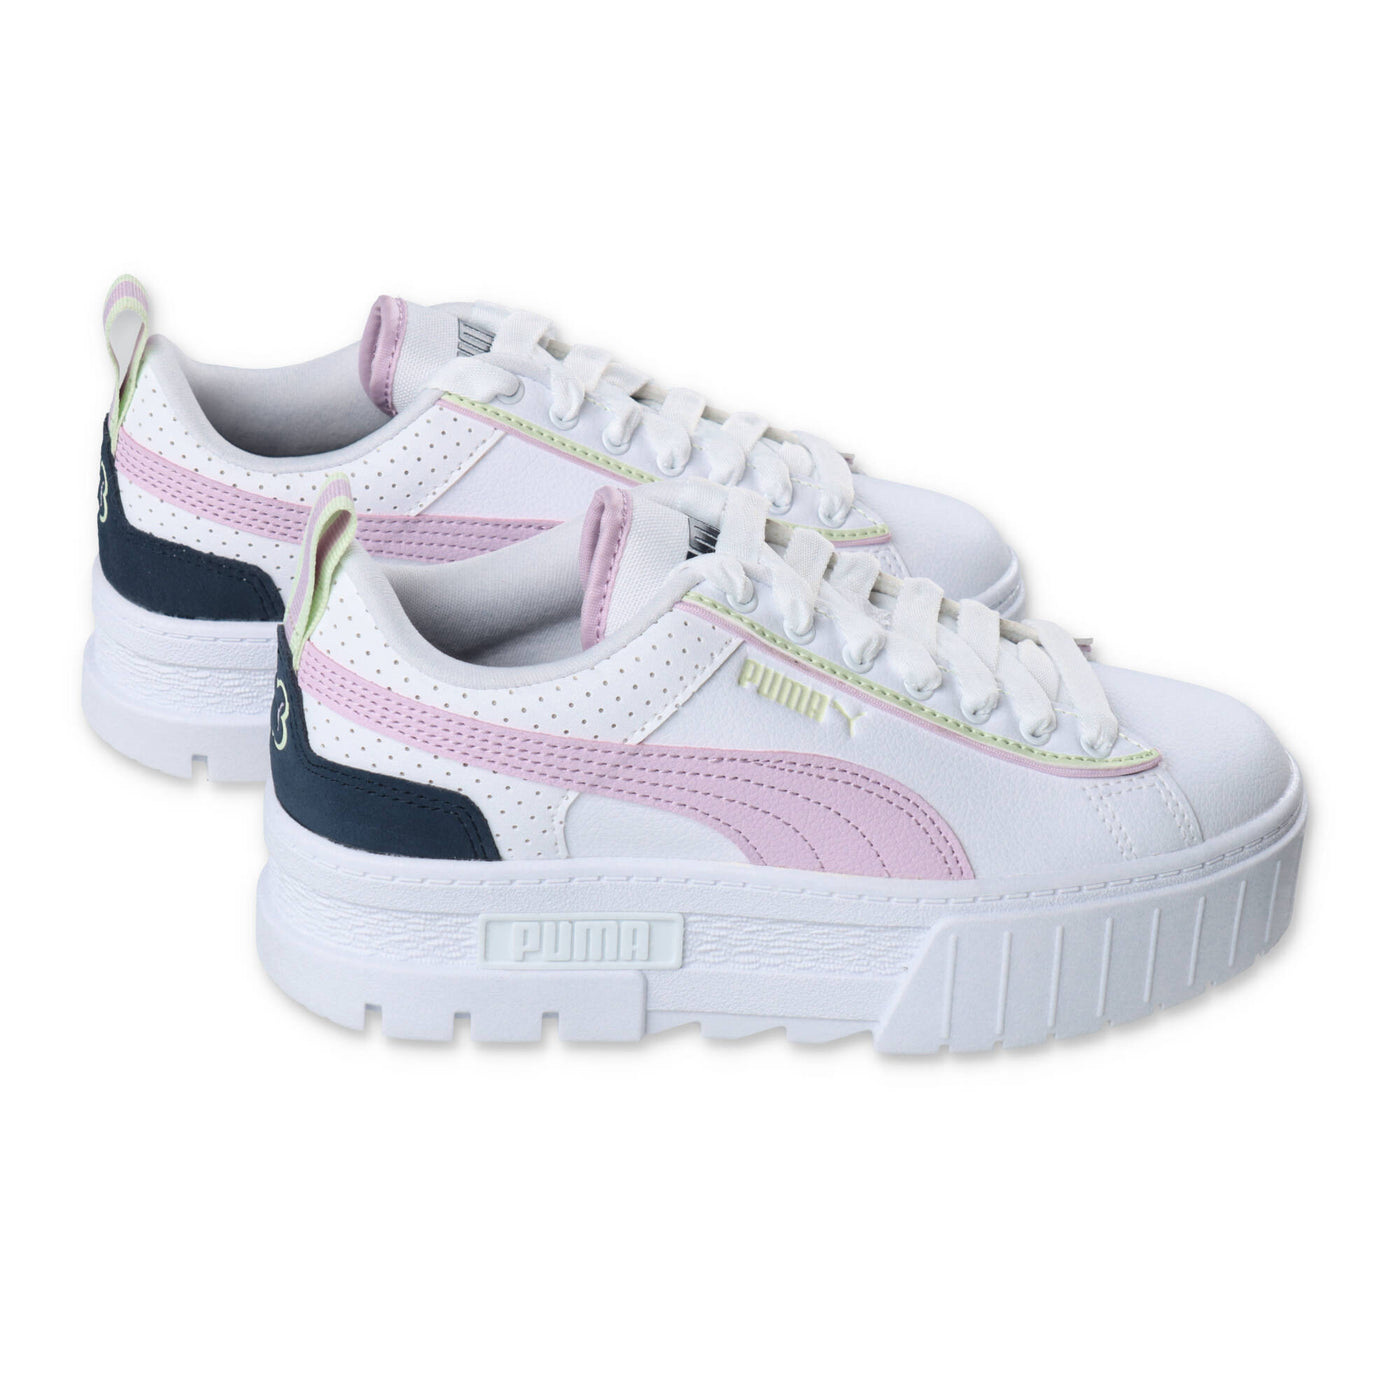 White with contrasting details leather girl PUMA sneakers